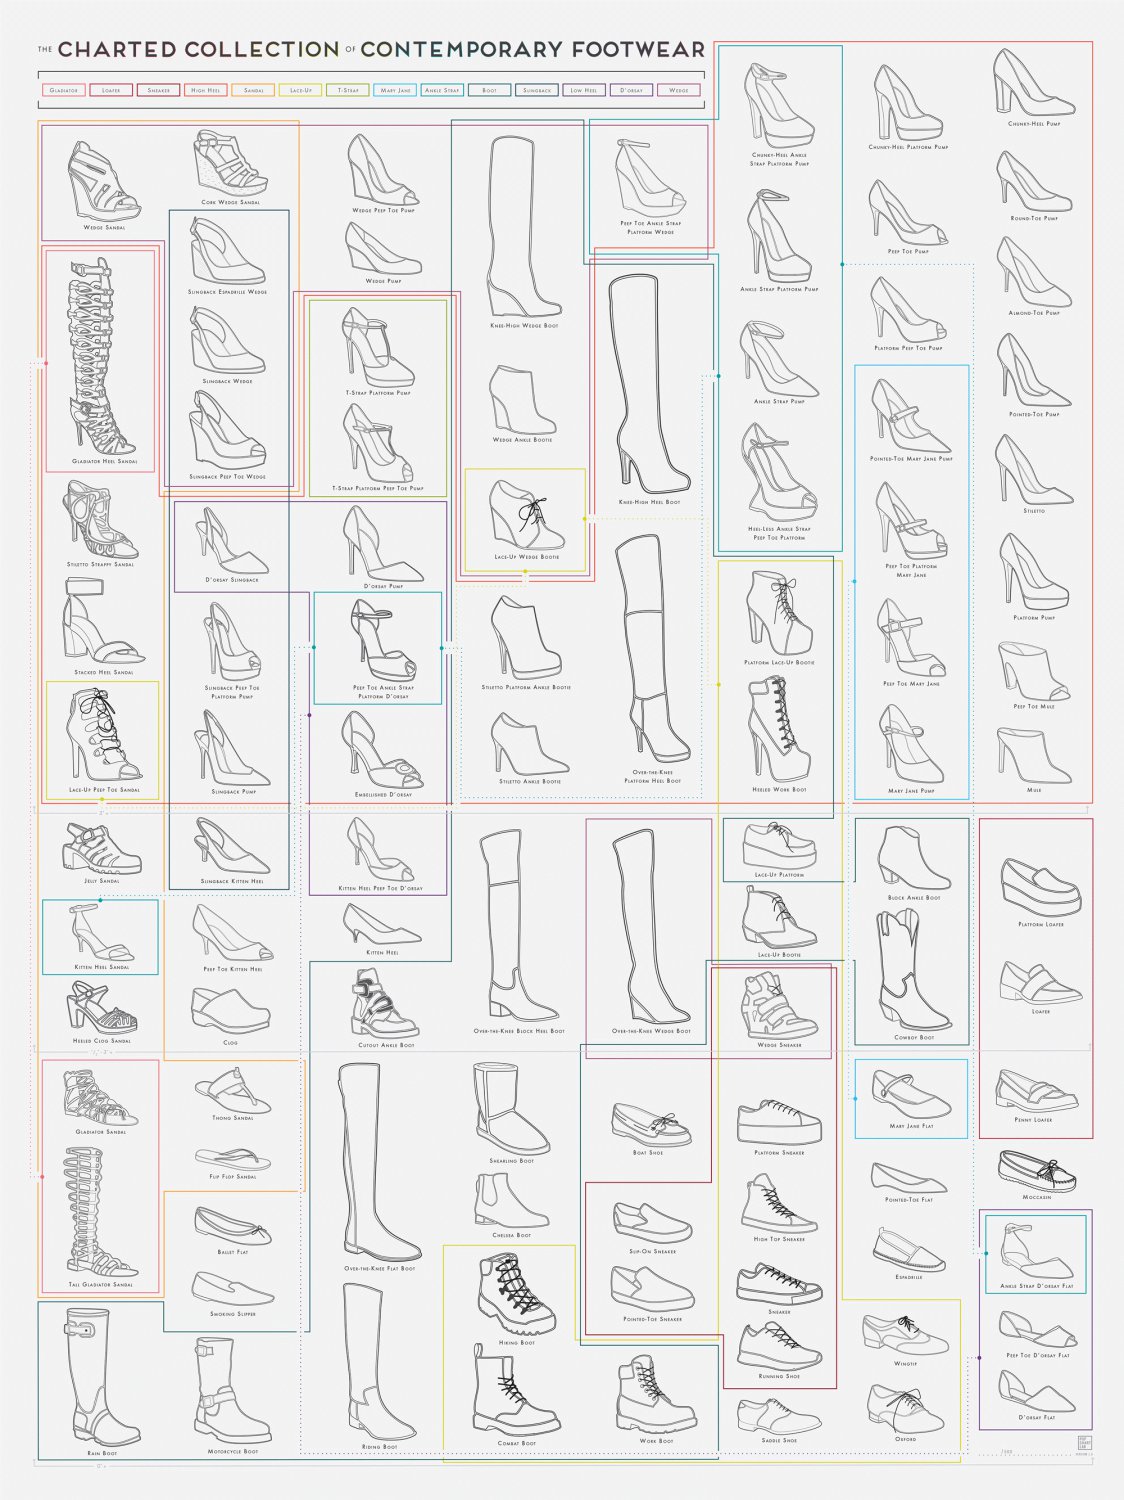 The Charted Collection of Contemporary Footwear  18"x28" (45cm/70cm) Poster